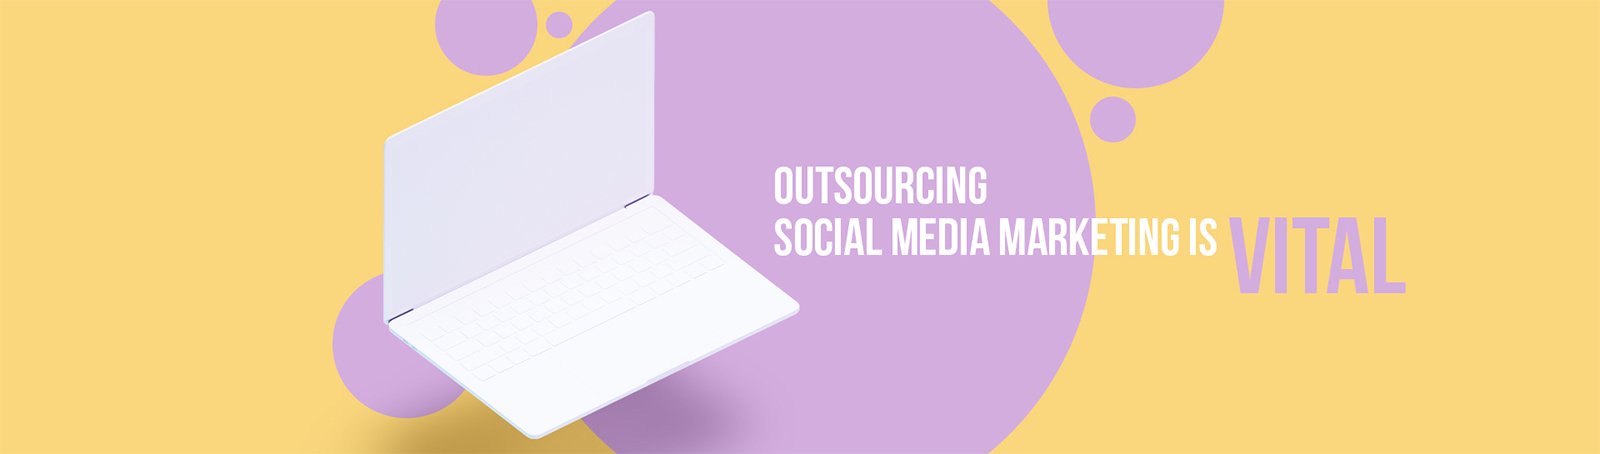 Outsourcing your Social Media Marketing is now vital